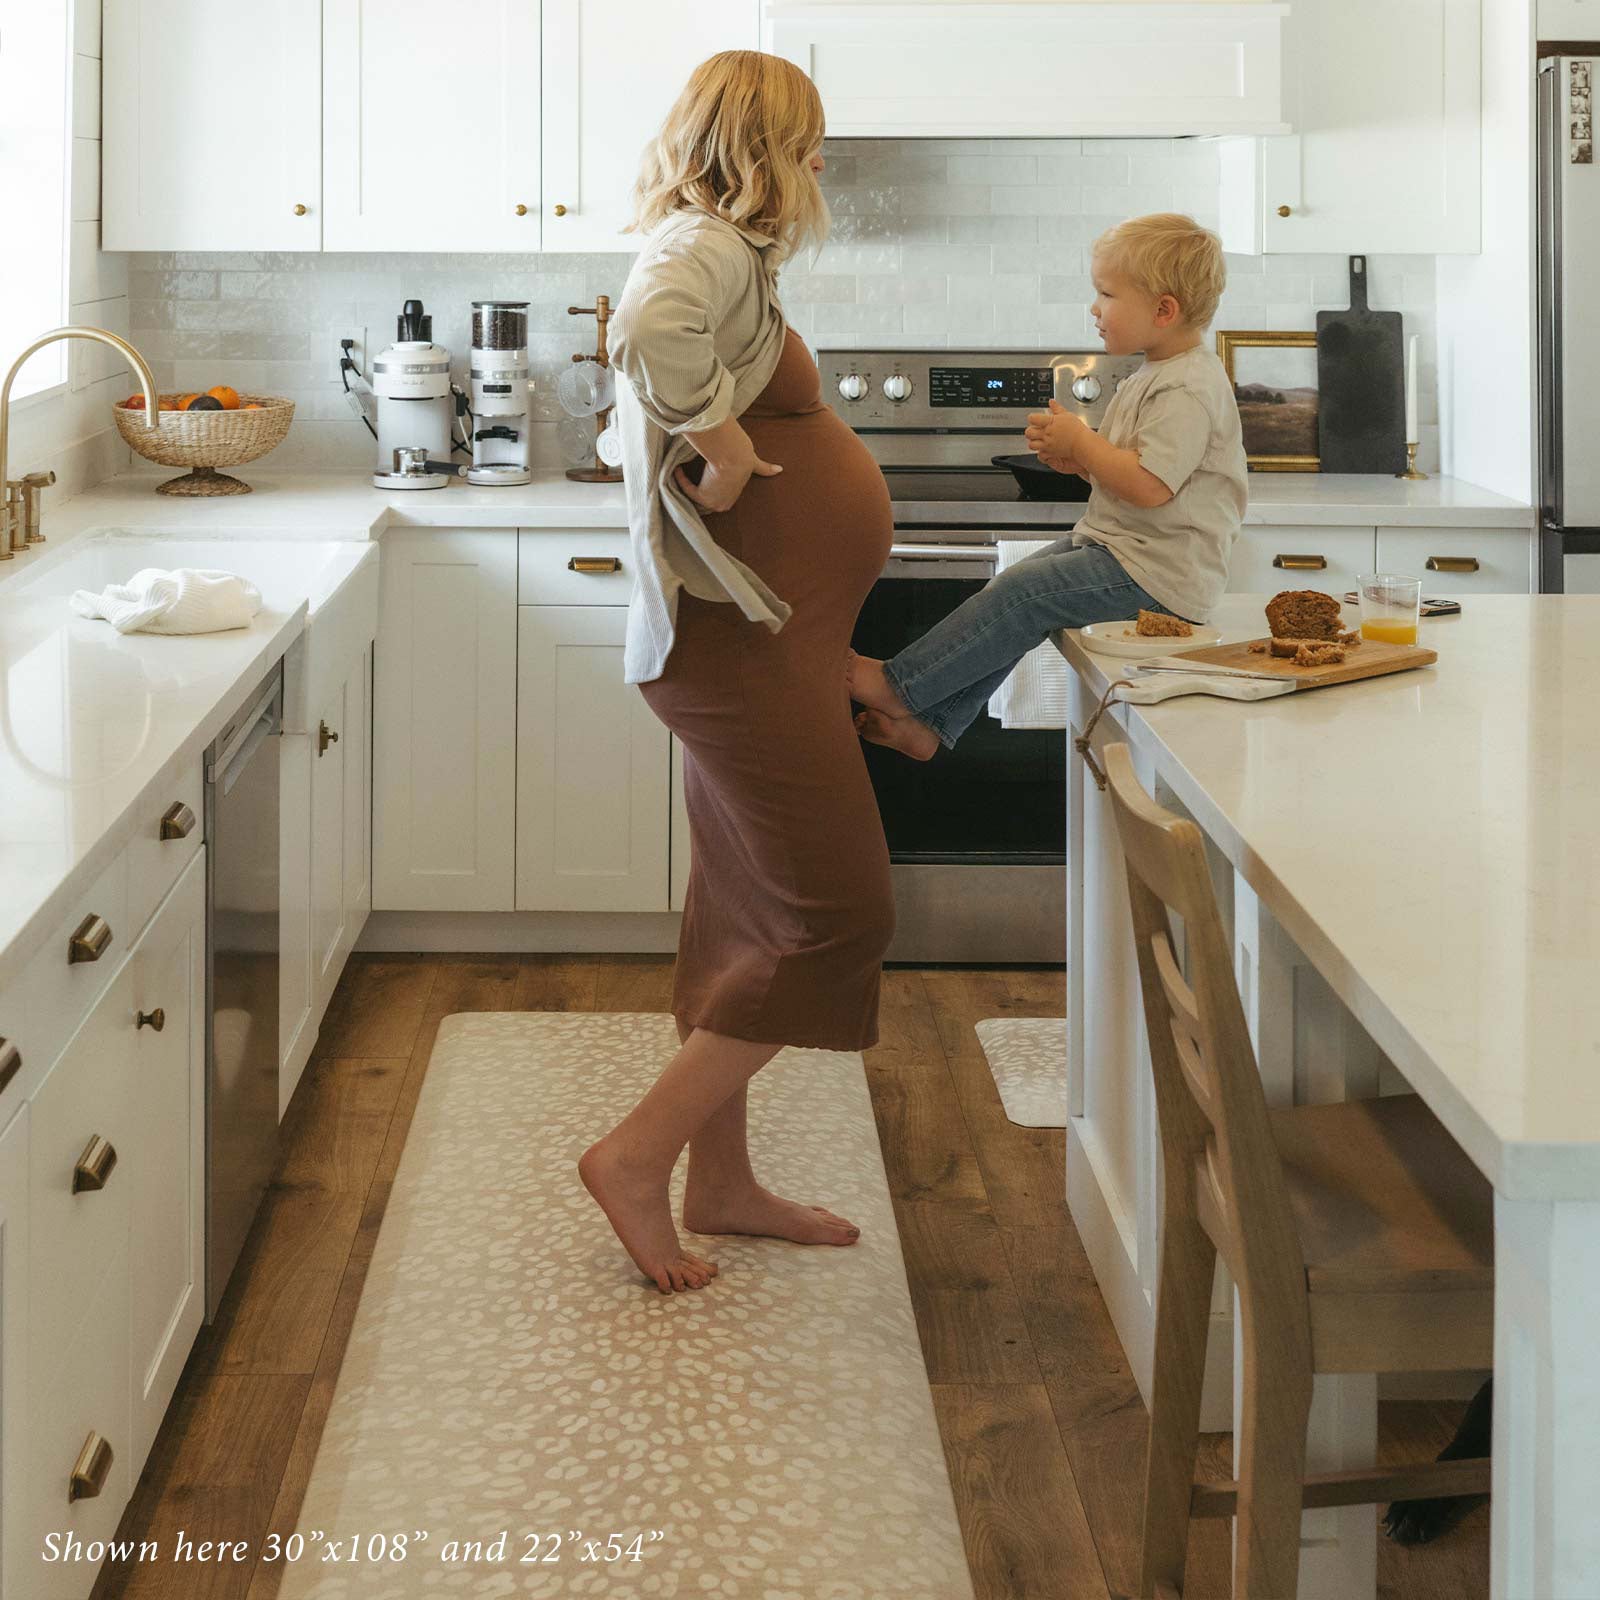 Della Salt neutral abstract animal print standing mat, showing size 30x108 in a kitchen with pregnant mom standing on the mat in front of toddler boy sitting on the counter eating a snack